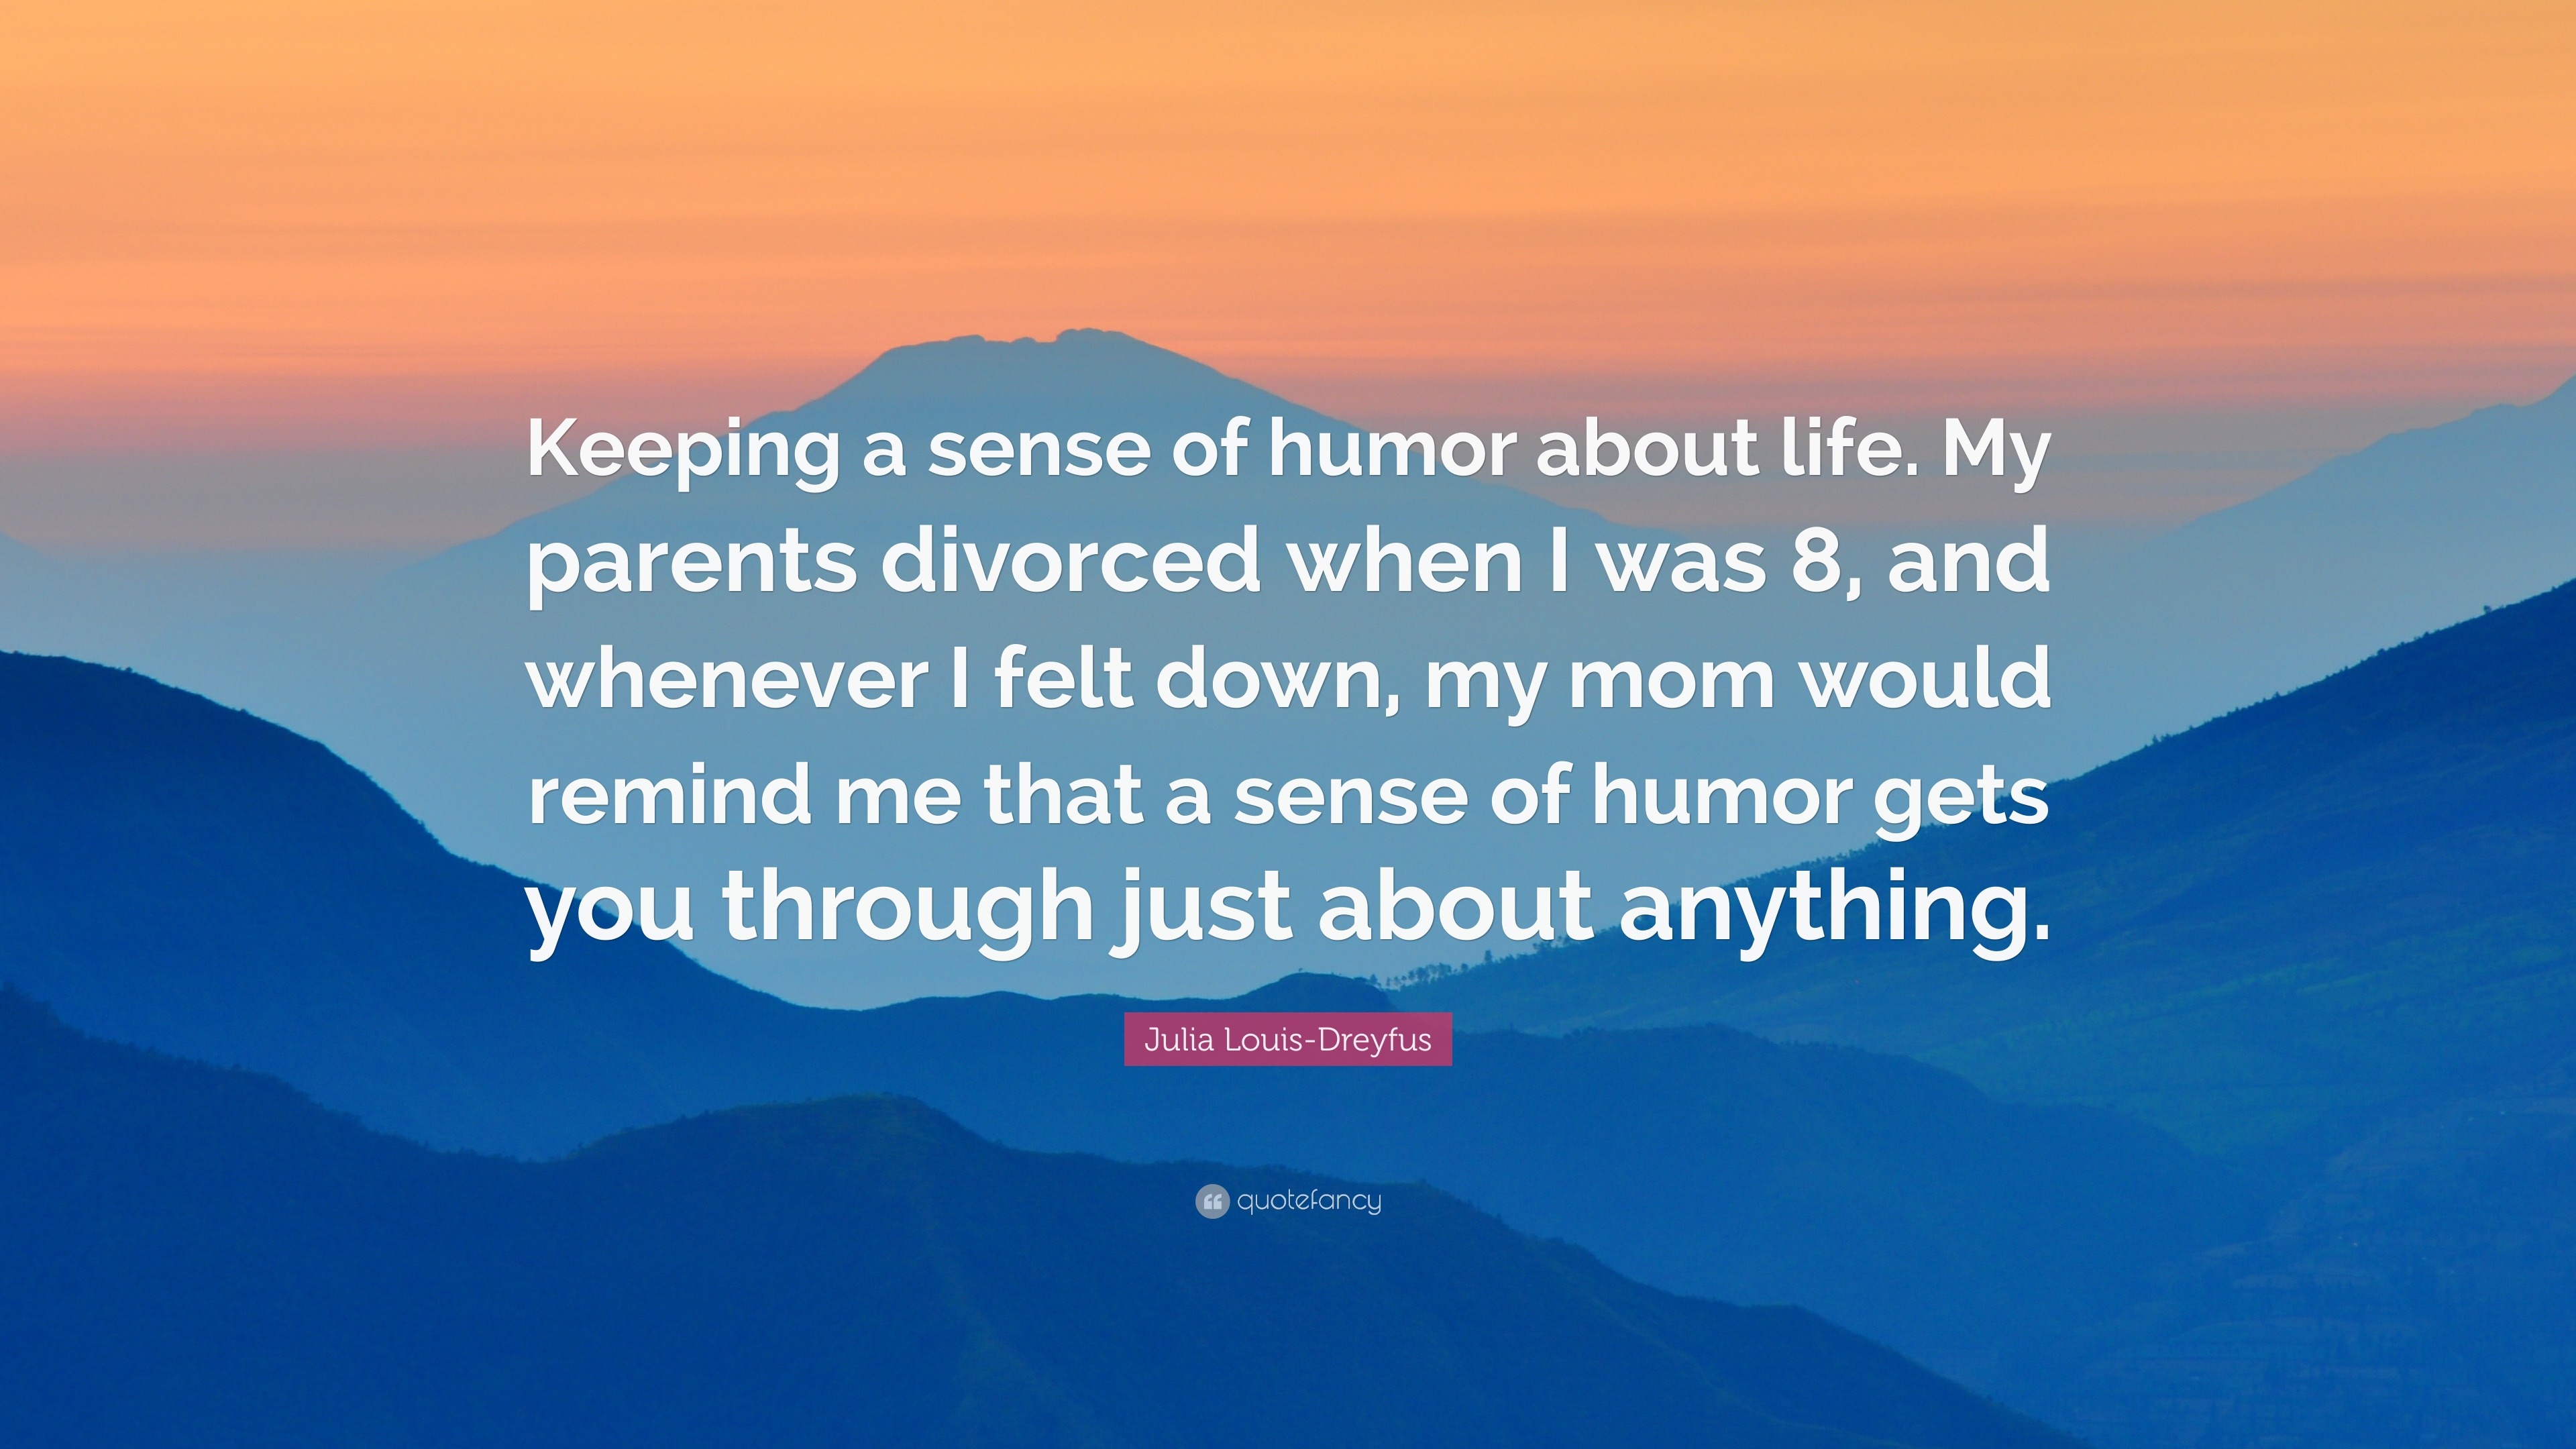 Julia Louis Dreyfus Quote “Keeping a sense of humor about life My